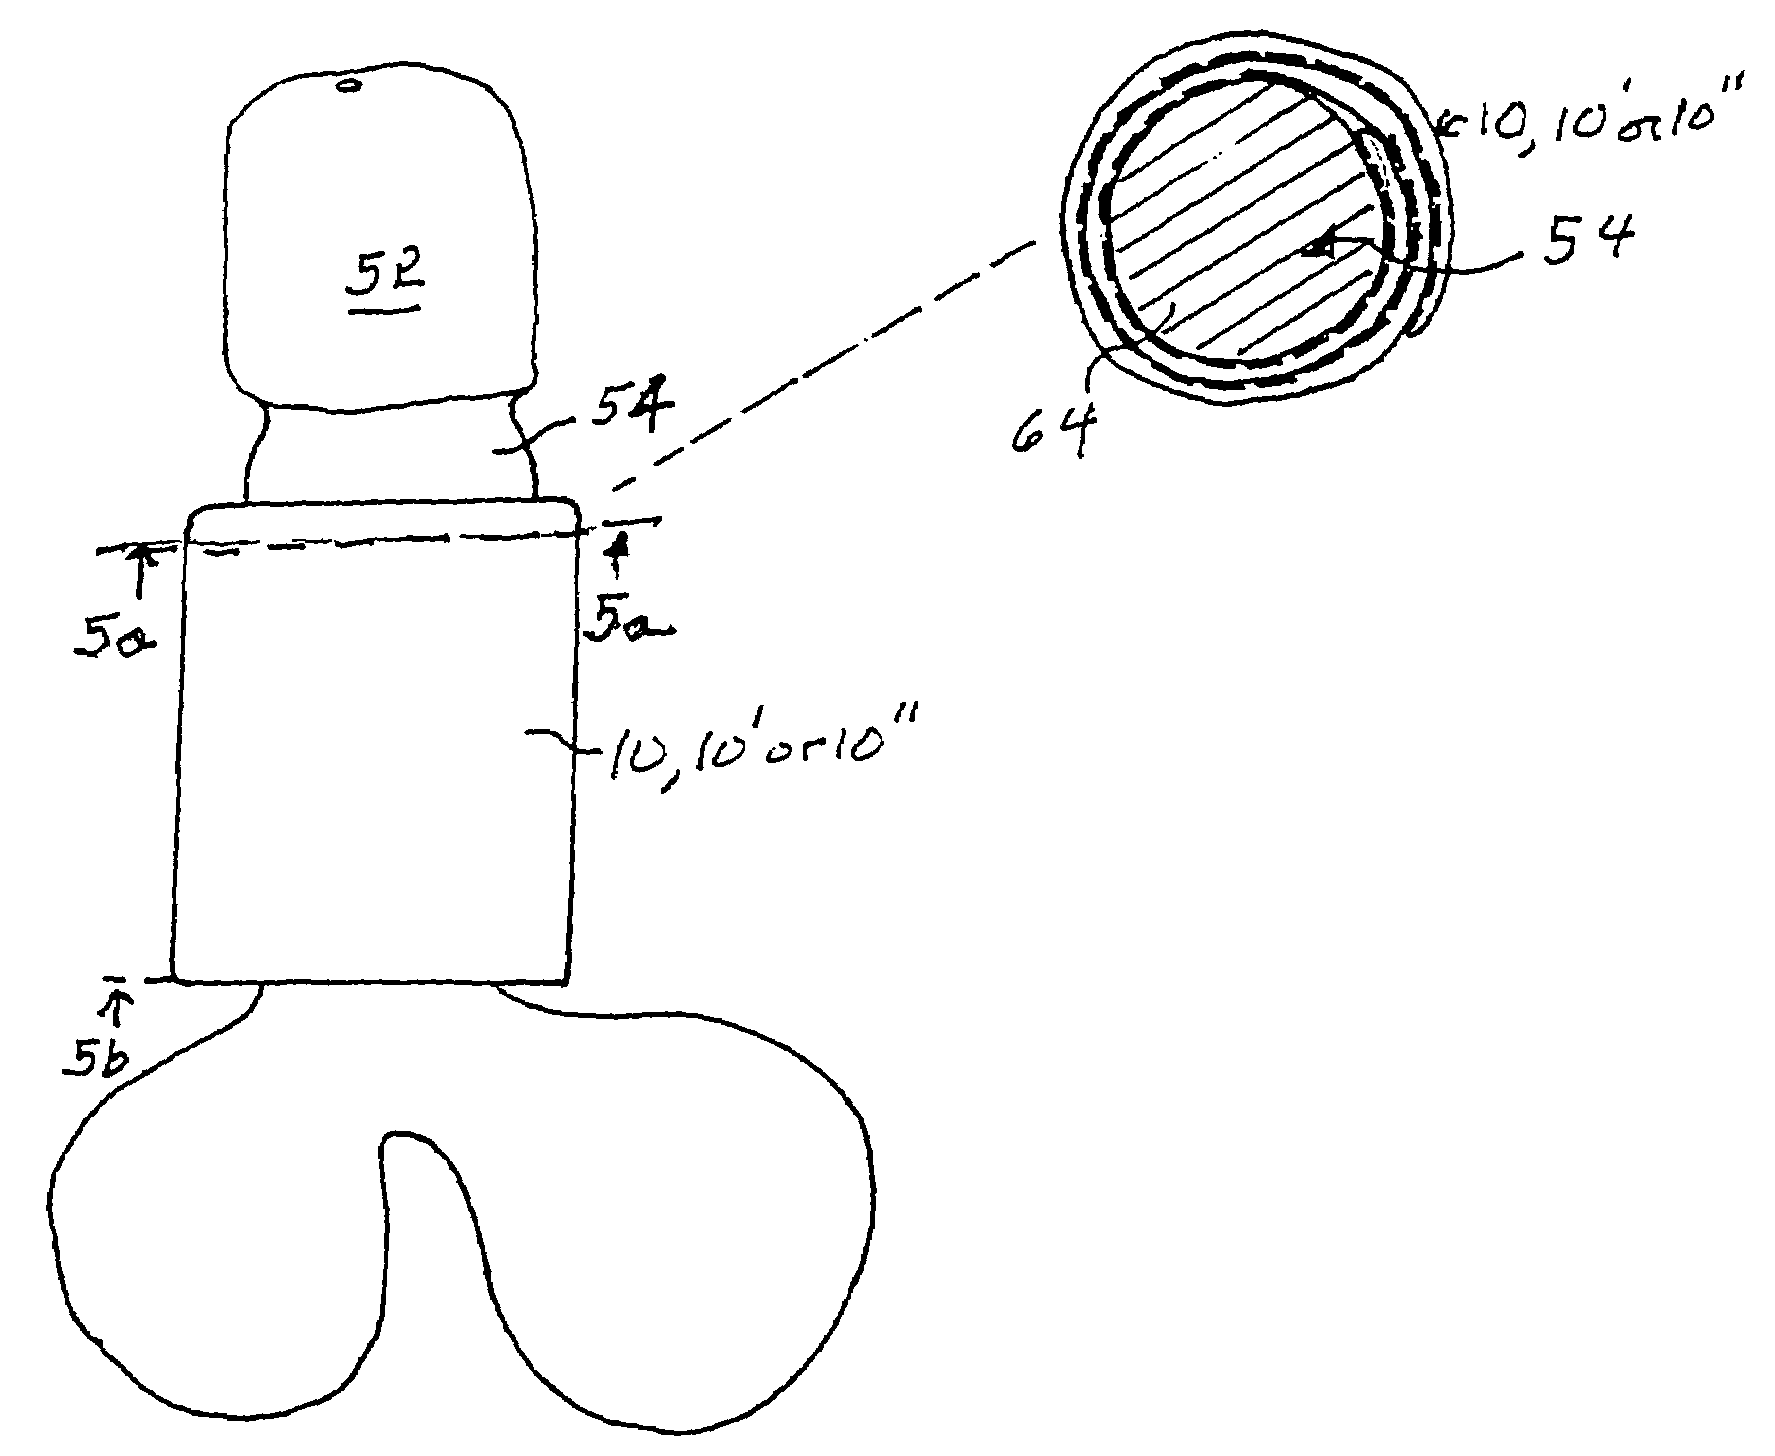 Erectile aide and method of attaching same